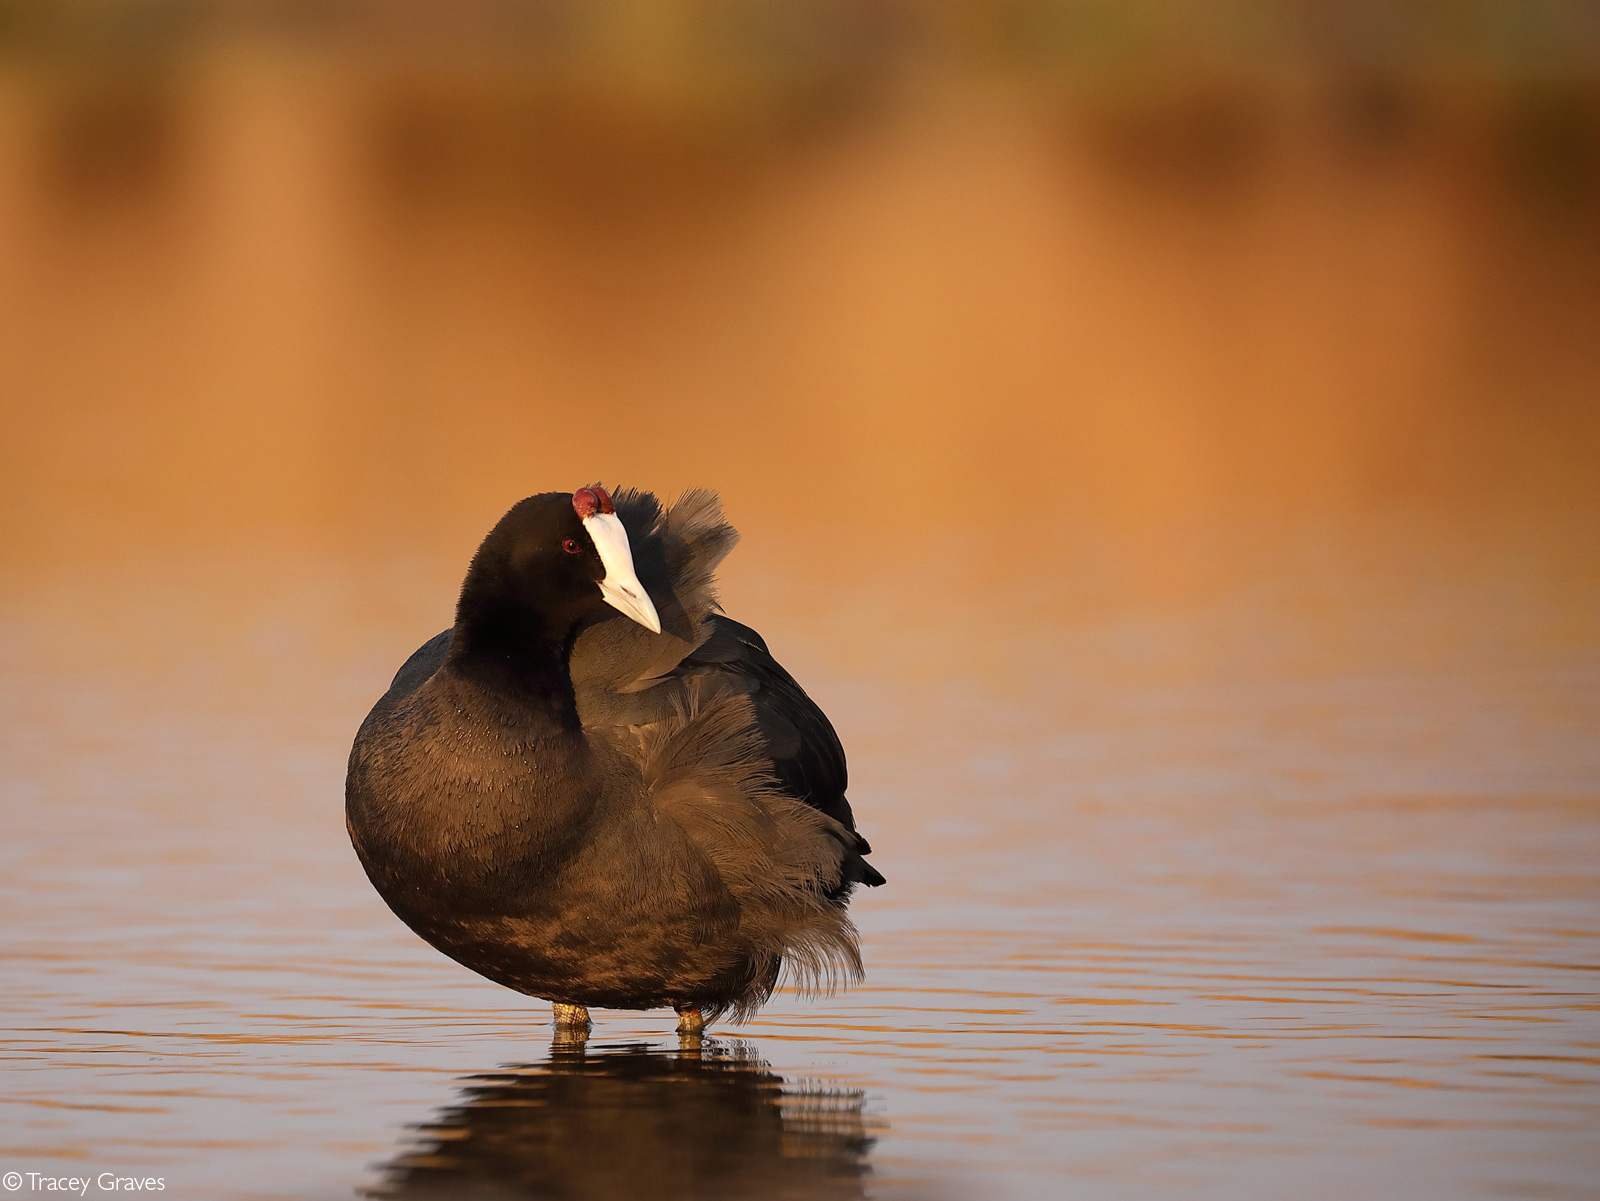 Red-knobbed coot. Zibulo Bird Hides, Mpumalanga, South Africa © Tracey Graves